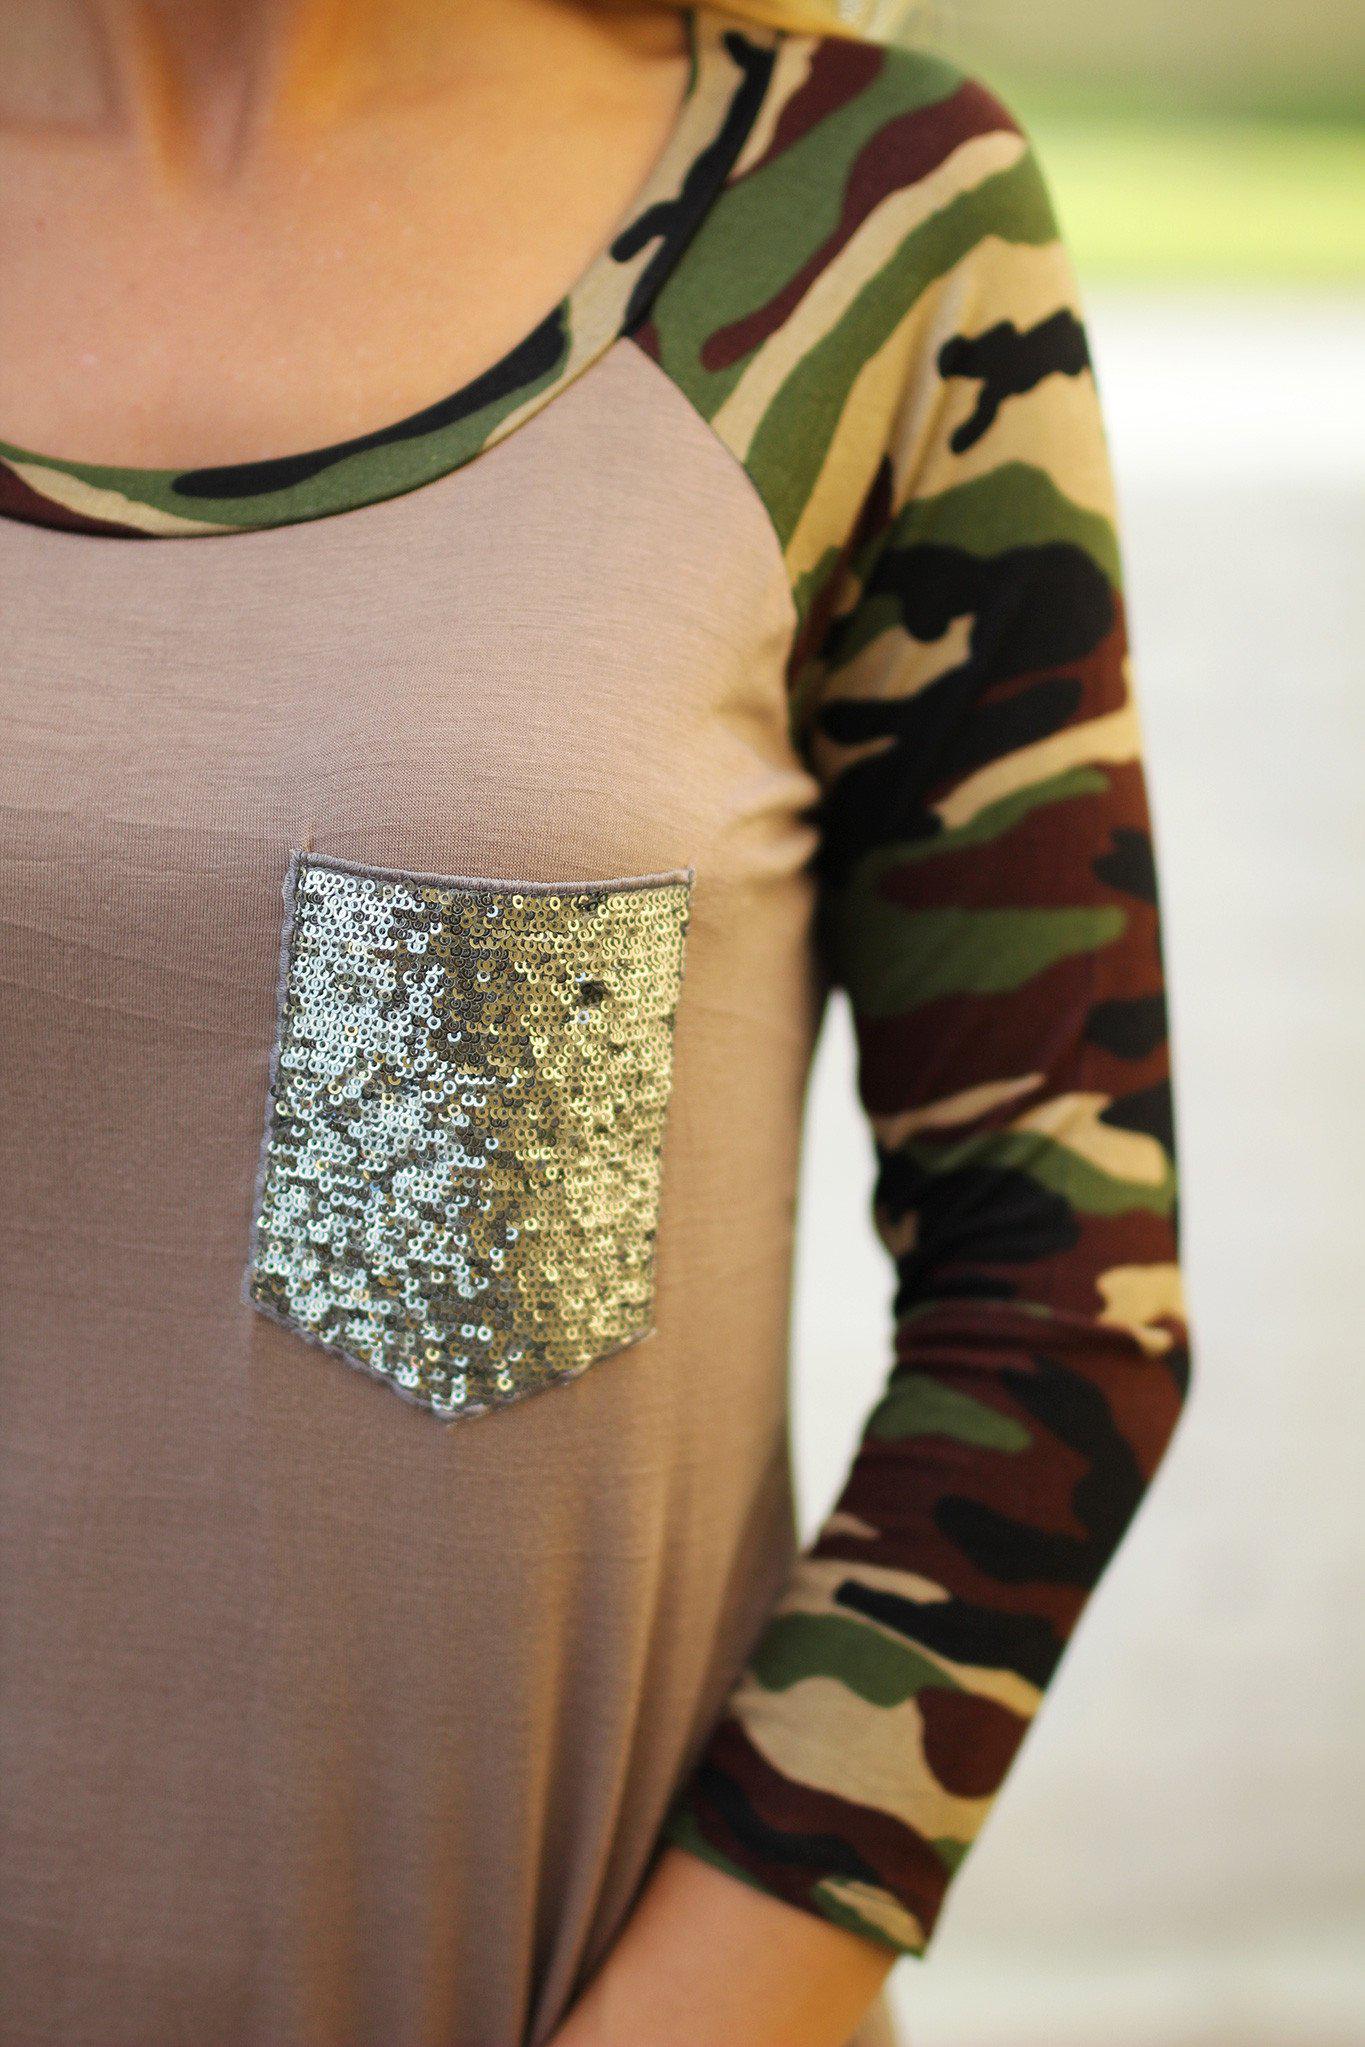 Mocha Camo Top with Sequined Pocket